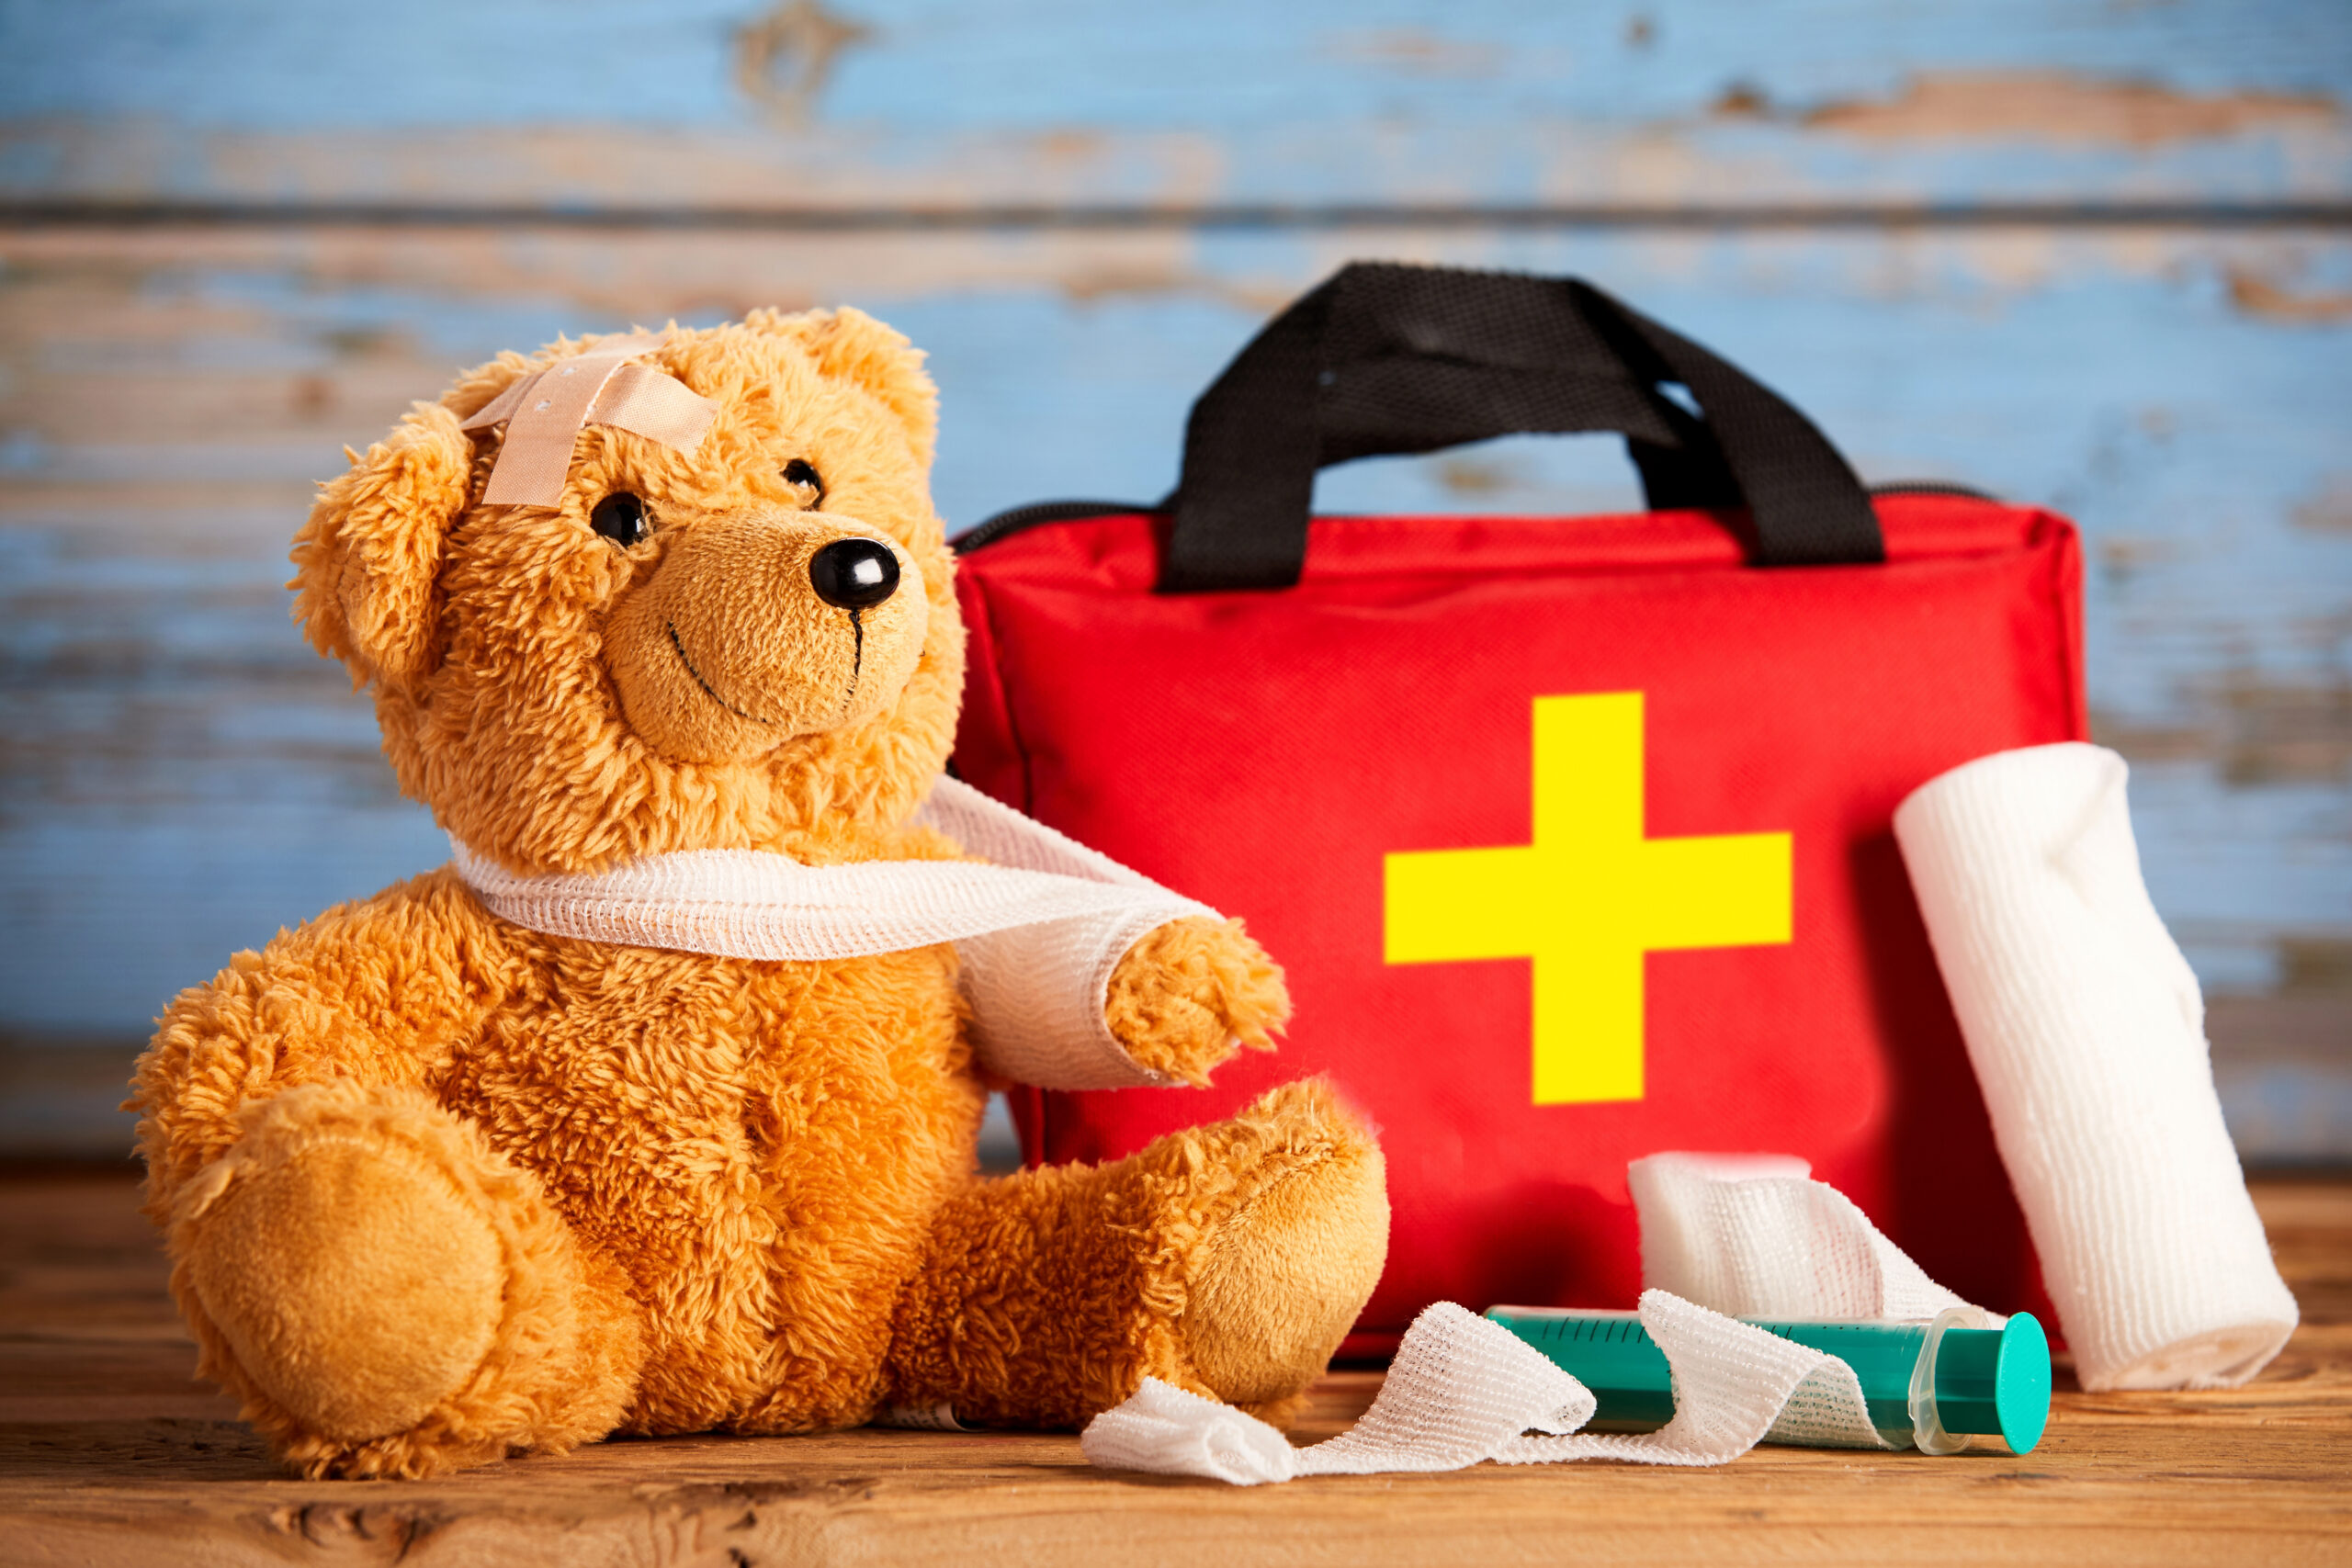 Paediatric,Healthcare,Concept,With,A,Little,Teddy,Bear,With,Its